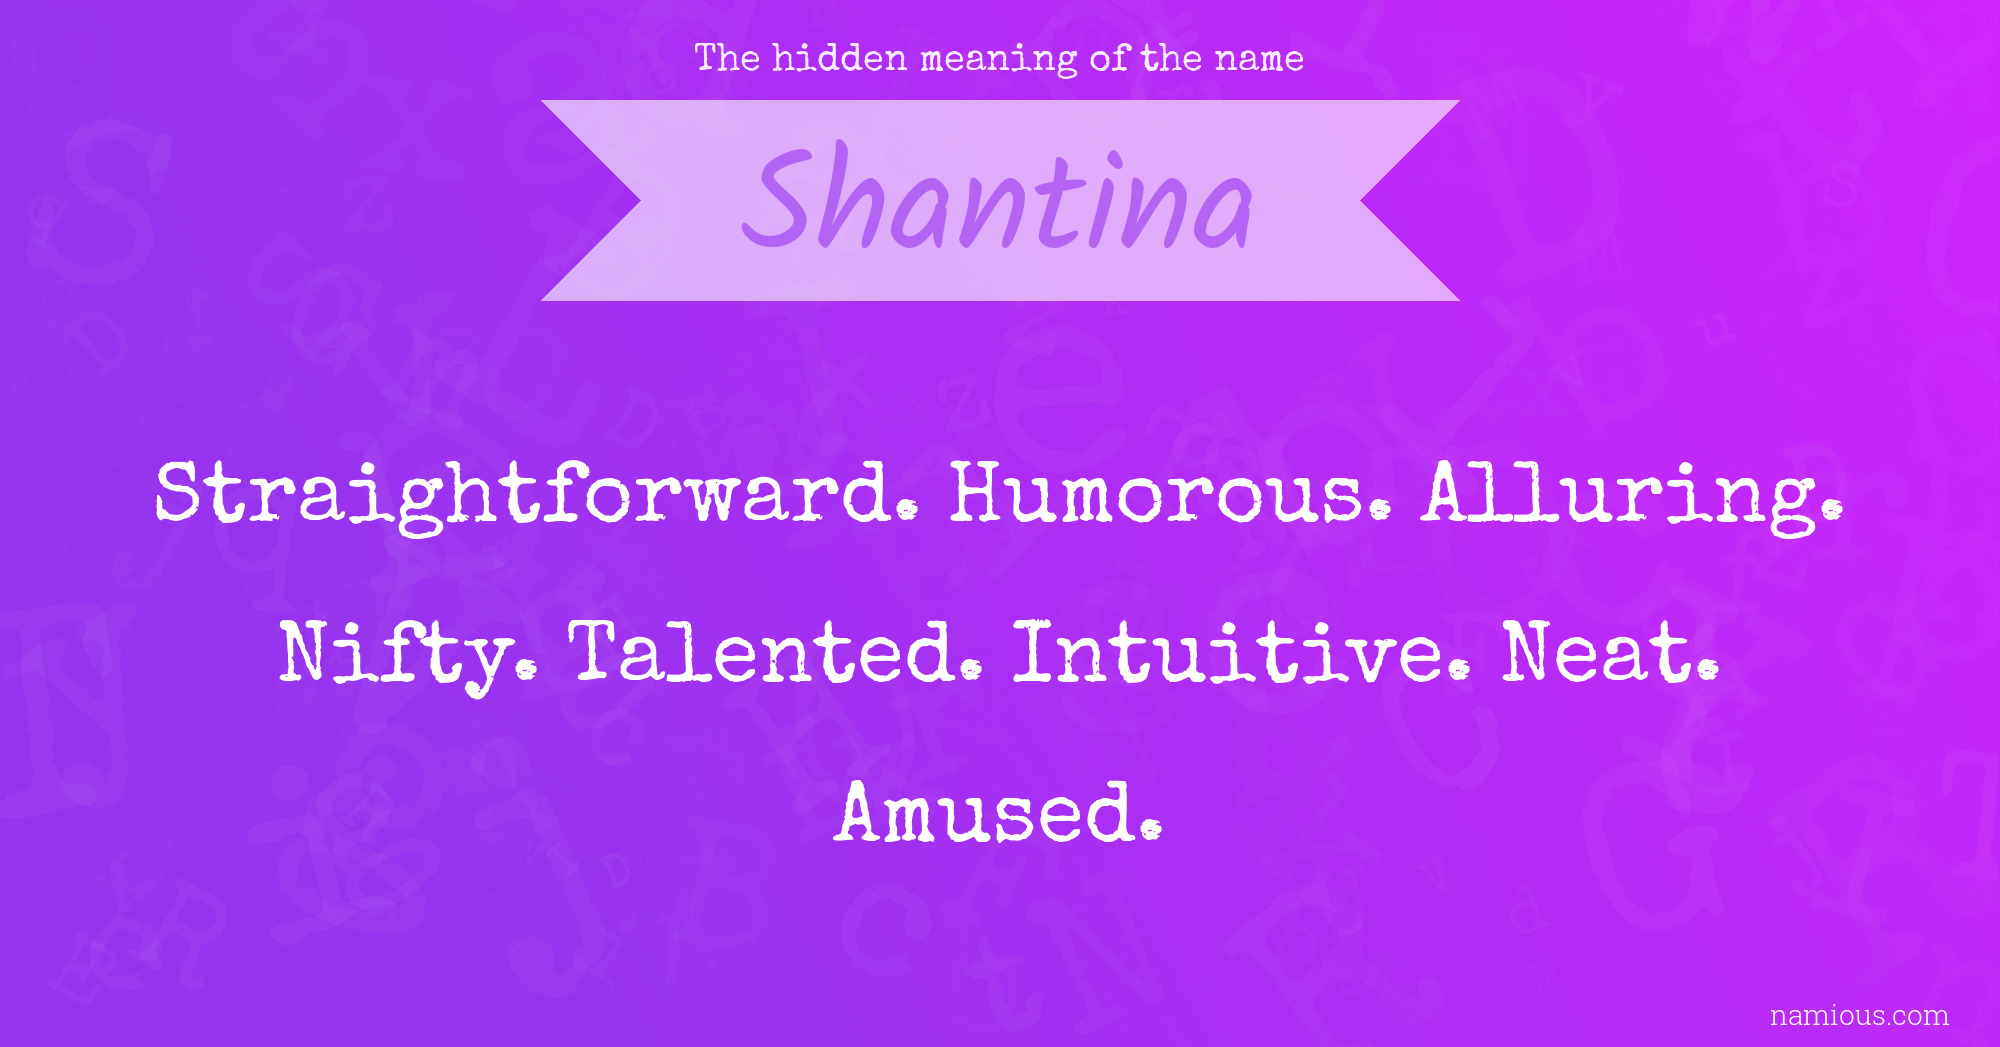 The hidden meaning of the name Shantina